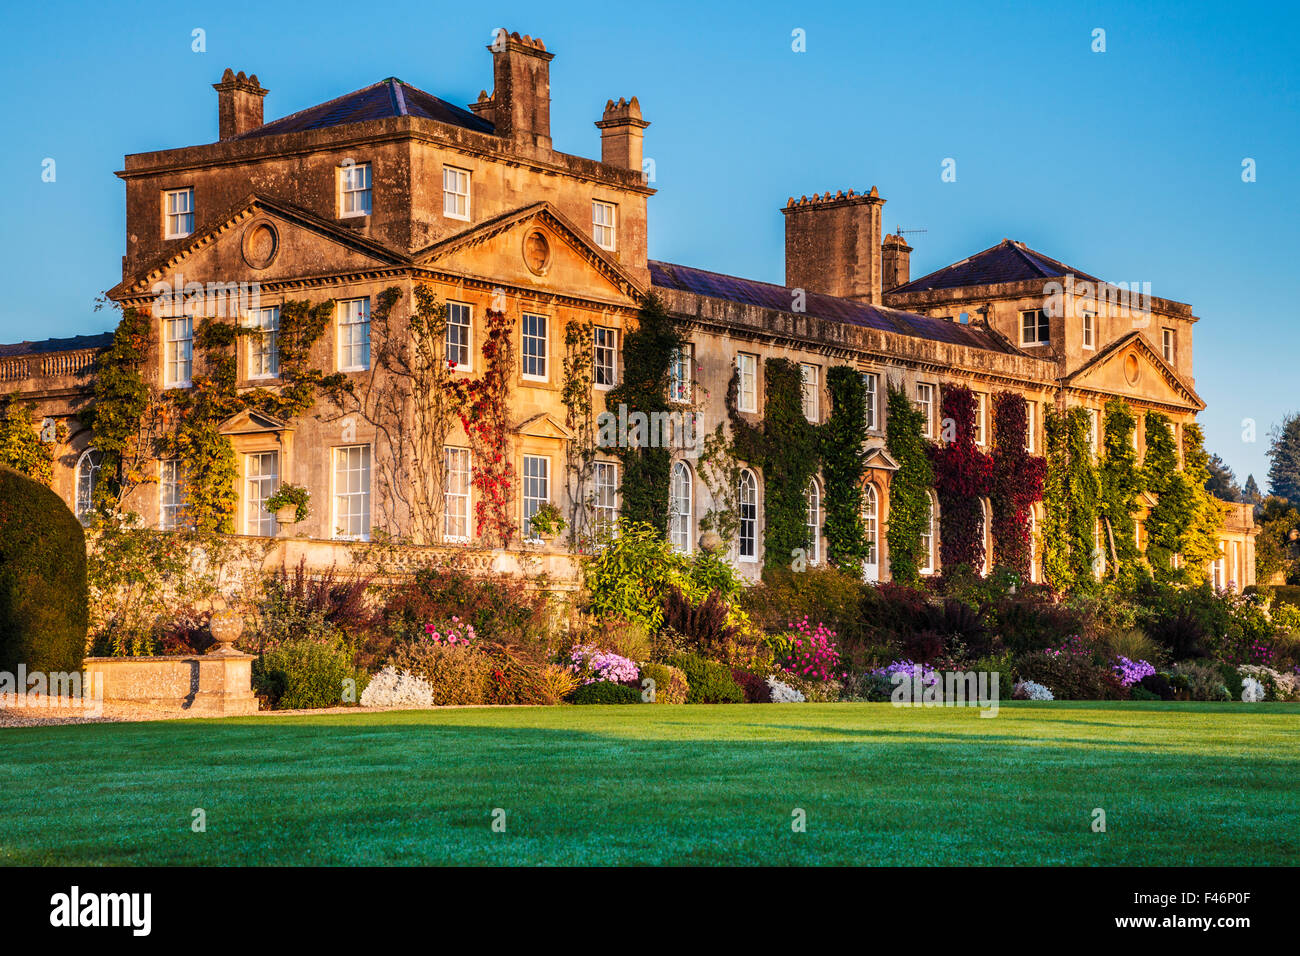 Bowood House in Wiltshire im Herbst. Stockfoto